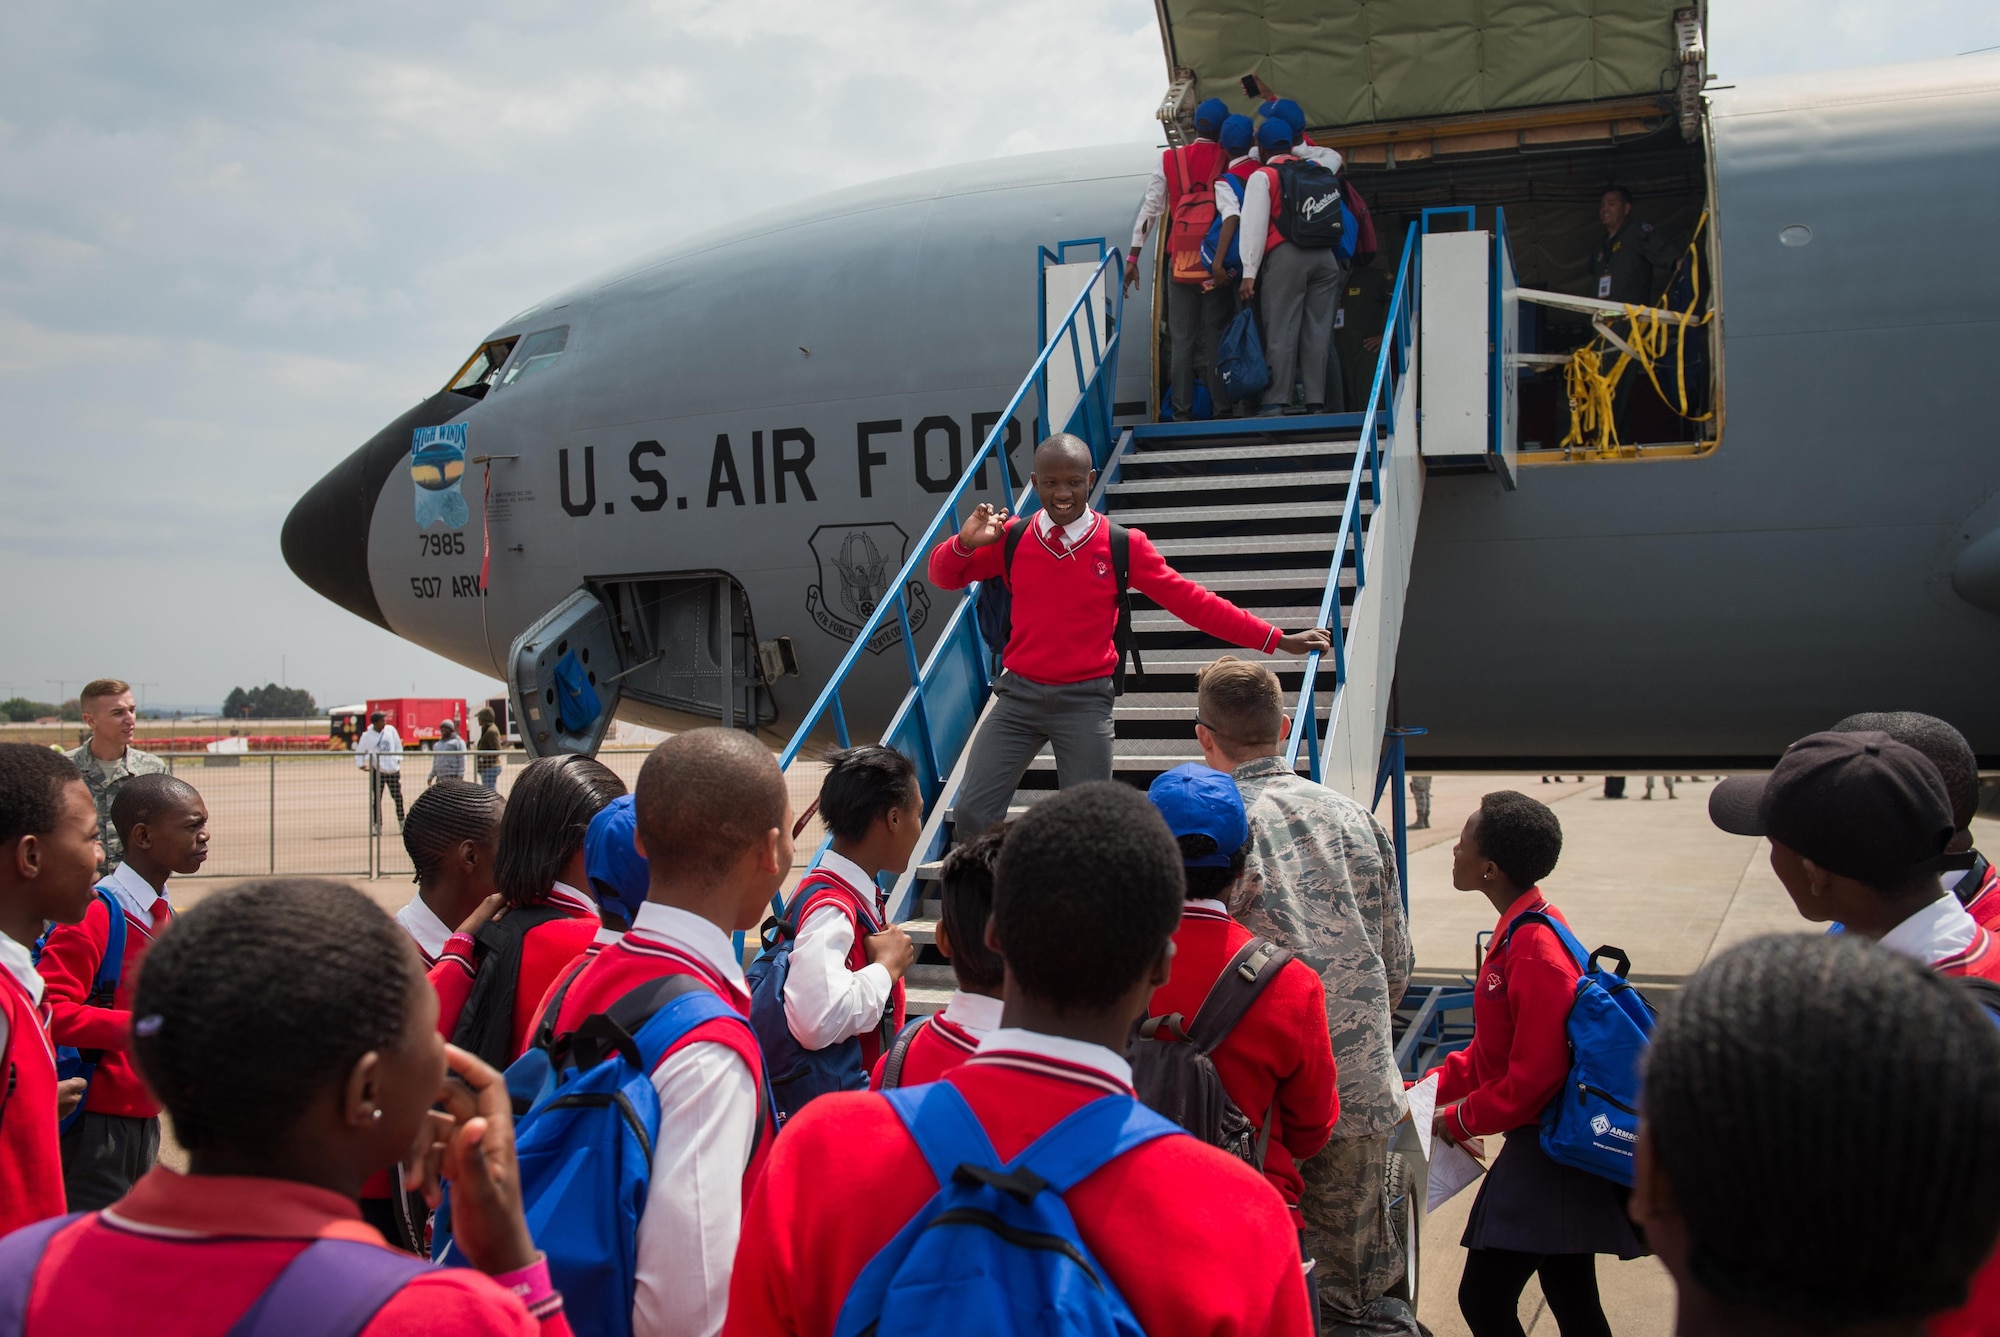 South African students tour a U.S. KC-135 Stratotanker at the African Aerospace and Defense Expo at Waterkloof Air Force Base, South Africa, Sept. 14, 2016. The U.S. military is exhibiting a C-17 Globemaster III, a KC-135 Stratotanker, a C-130J Super Hercules, an HC-130 King, and an MQ-9 Reaper. The aircraft come from various Air National Guard and Air Force Reserve Command units. The U.S. routinely participates in events like AADE to strengthen partnerships with regional partners. (U.S. Air Force photo by Tech. Sgt. Ryan Crane)